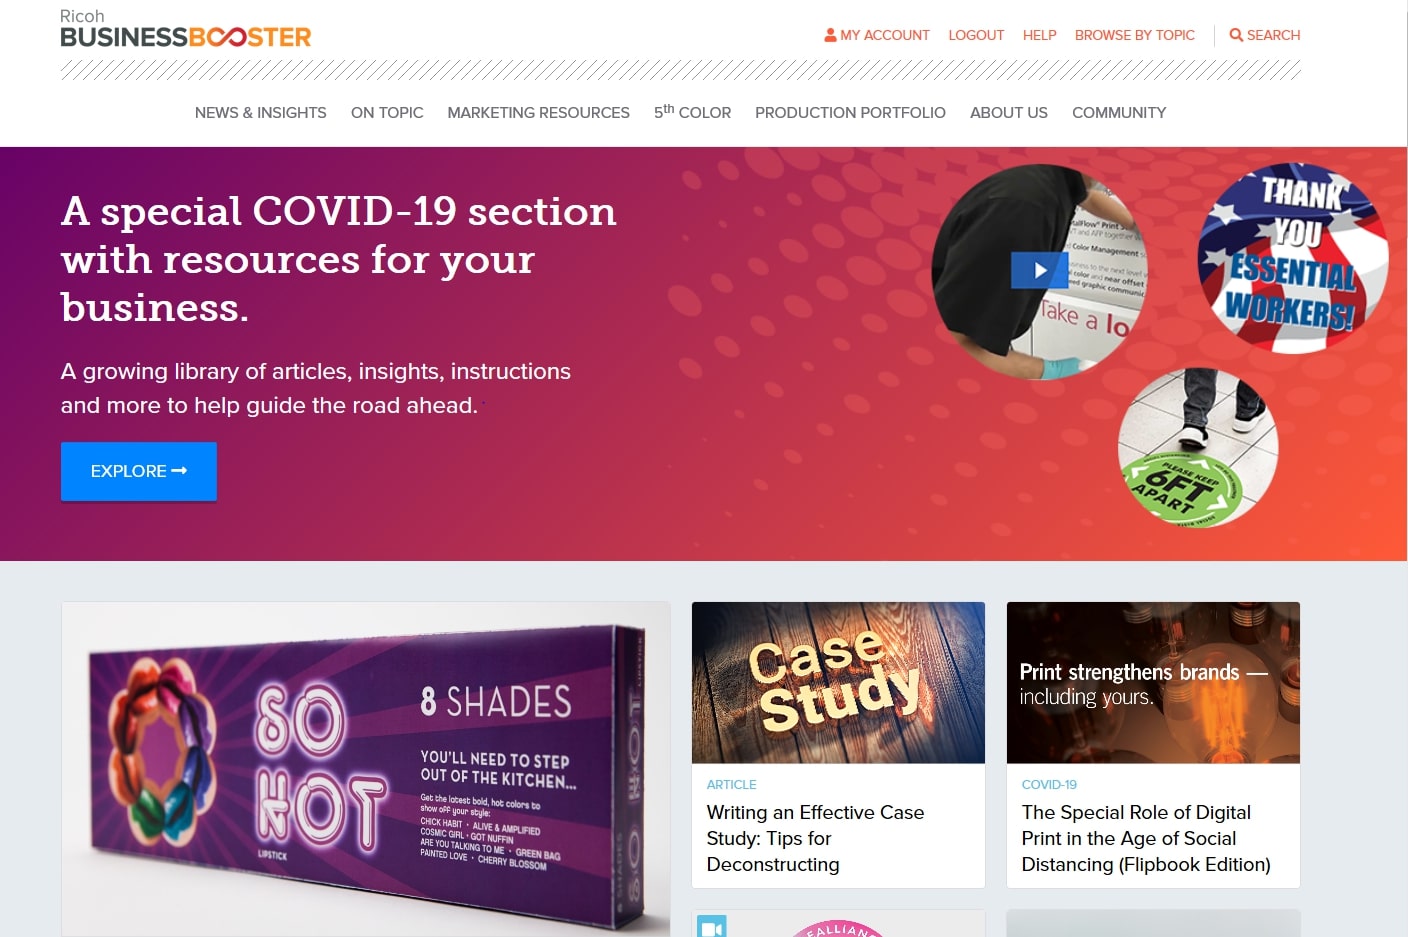 Print community offered Covid-19 advice and support as part of newly launched Ricoh Business Booster